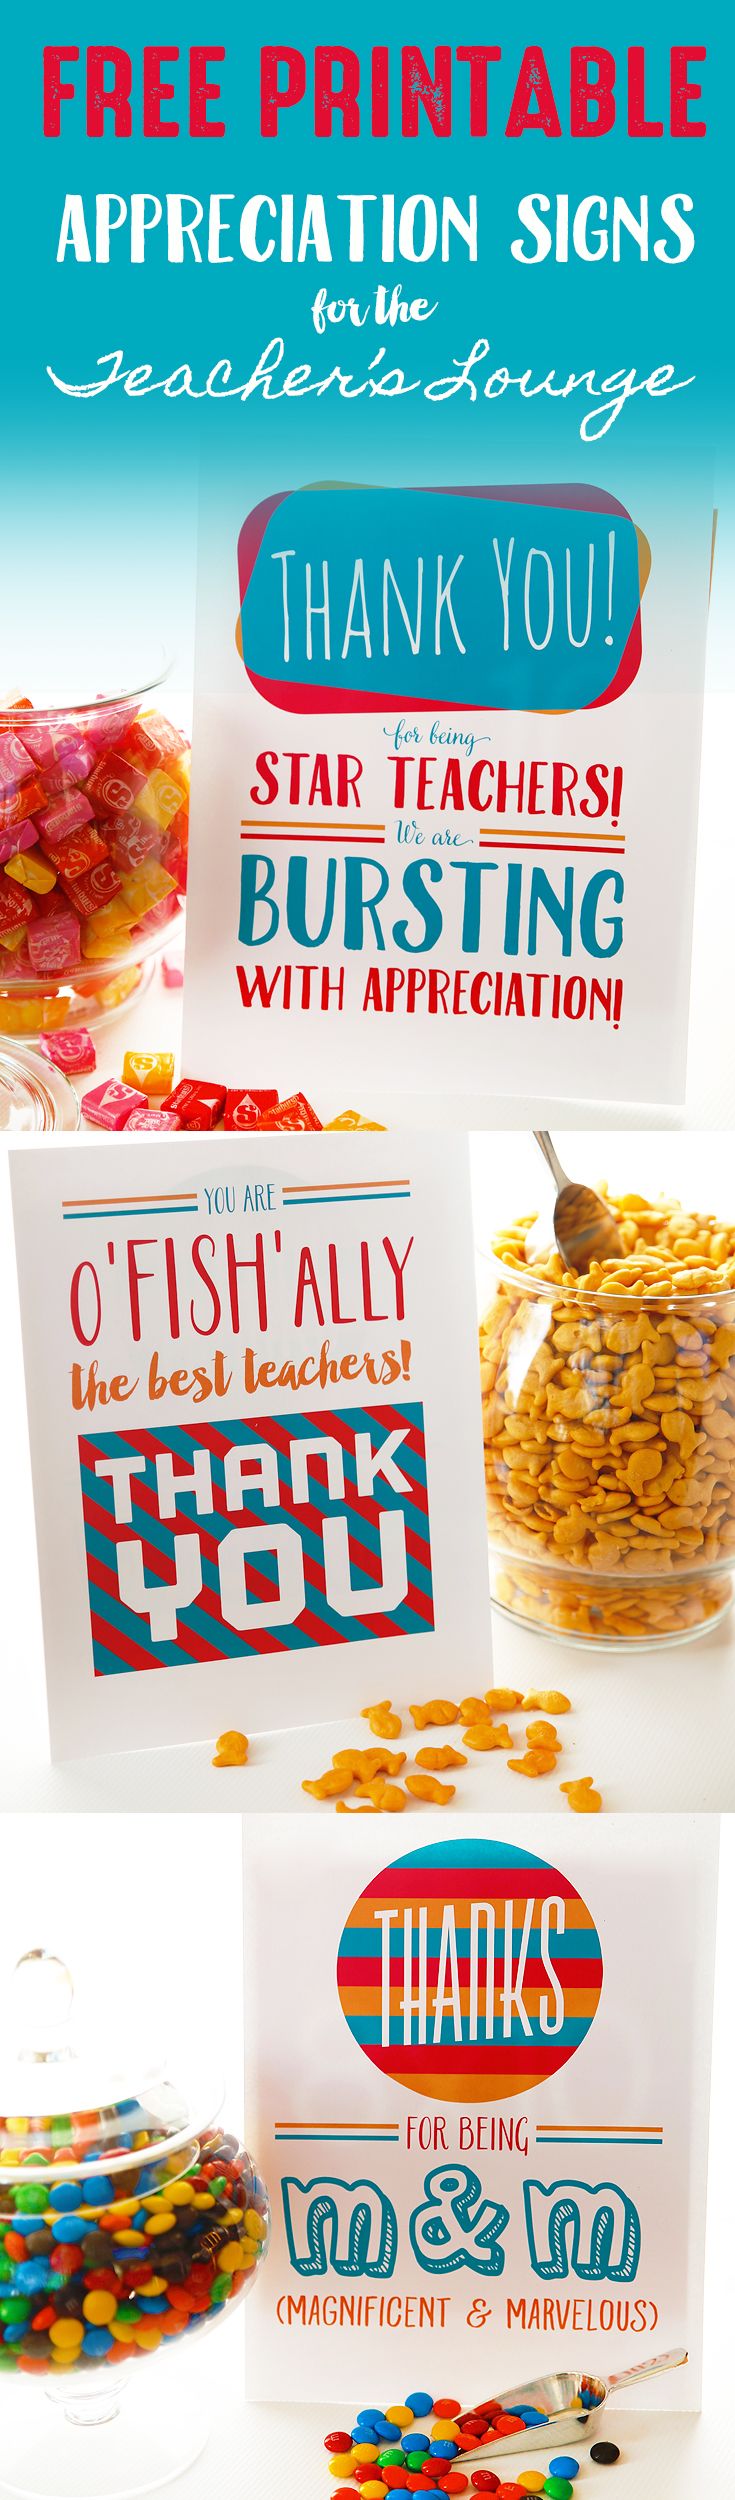 Printable Appreciation Signs For Teacher’s Lounge